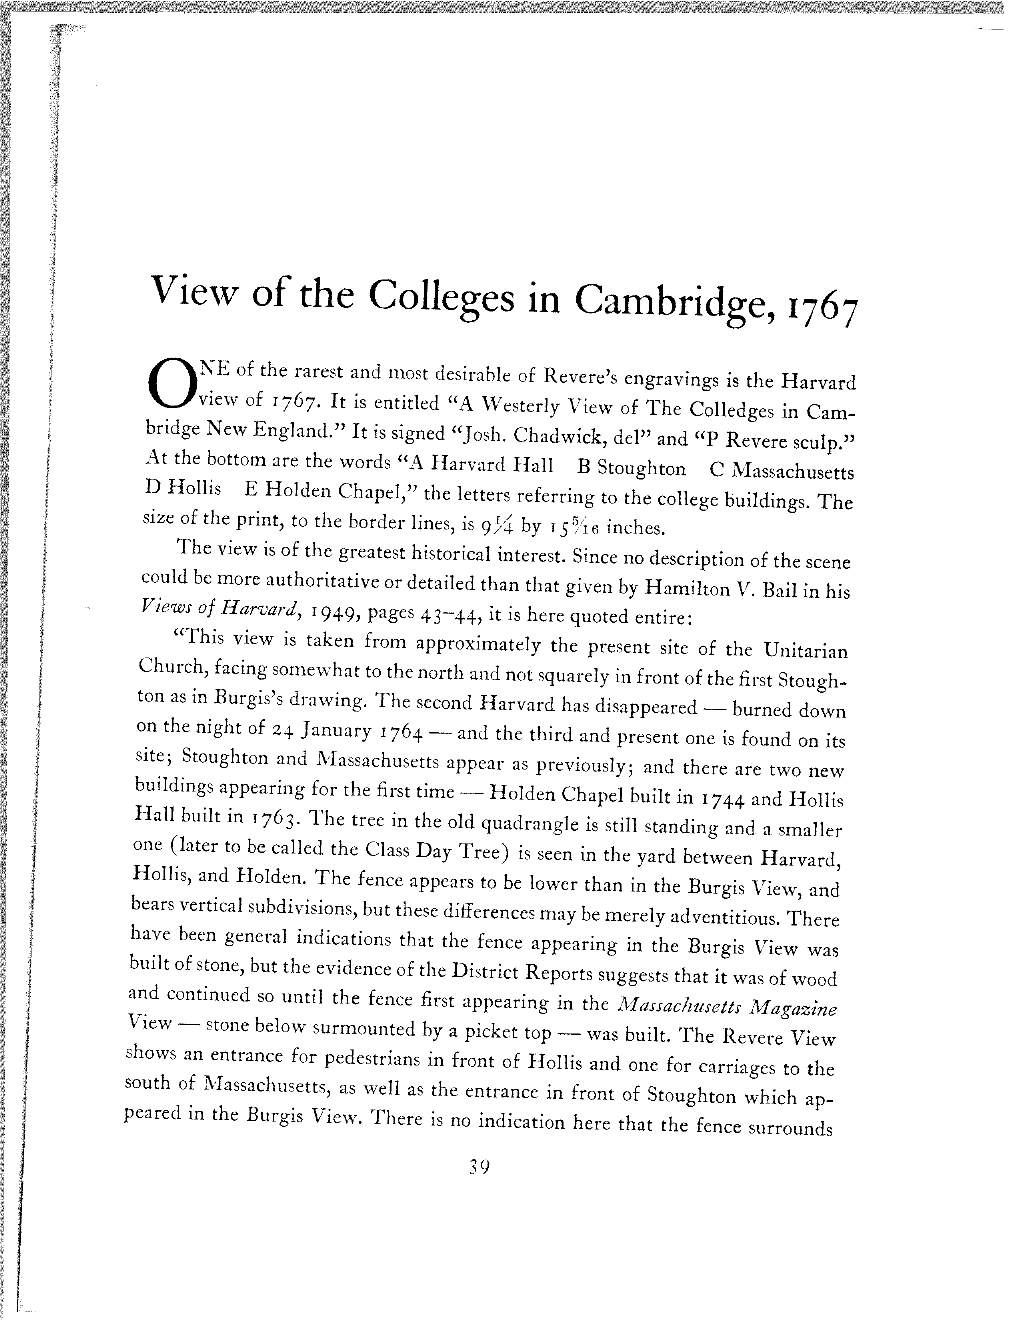 View of the Colleges in Cambridge, 1767